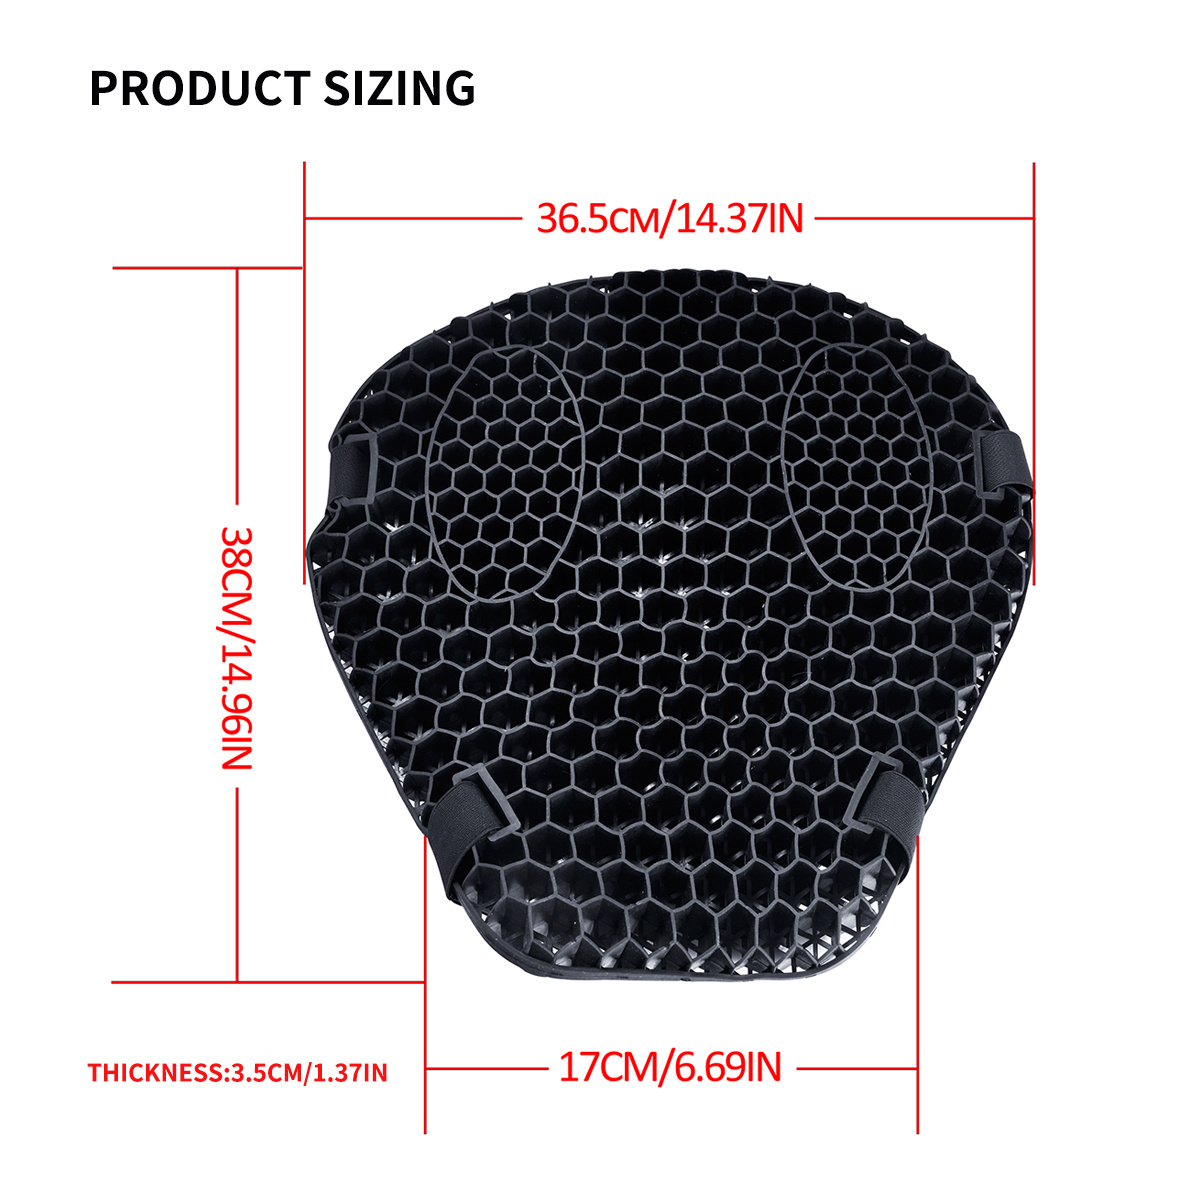 Universal Gel Motorcycle Seat Cushion - Superior Absorption and Protection  with Warm Cover- Comfortable and Large 3D Honeycomb motorcycle seat cushions  for long rides